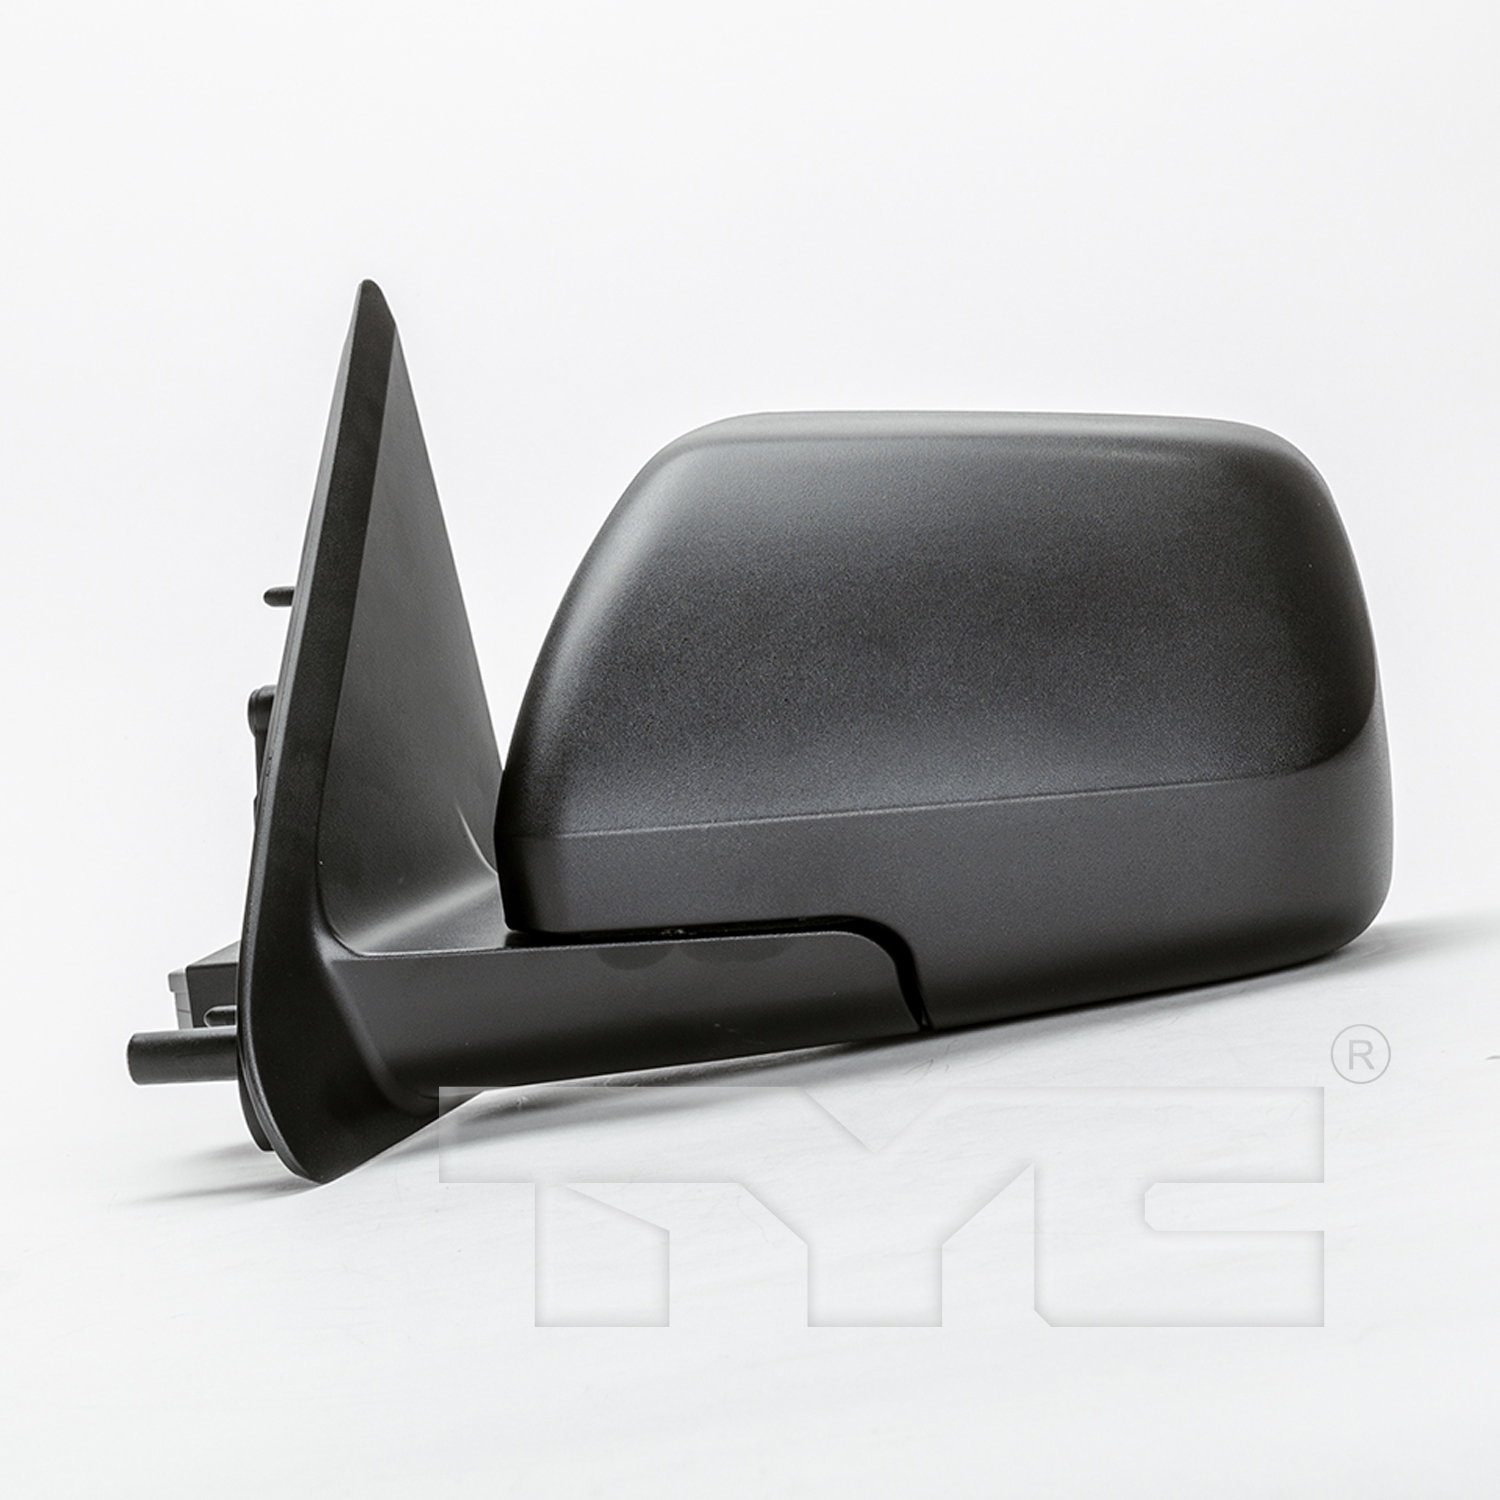 Aftermarket MIRRORS for FORD - ESCAPE, ESCAPE,08-09,LT Mirror outside rear view